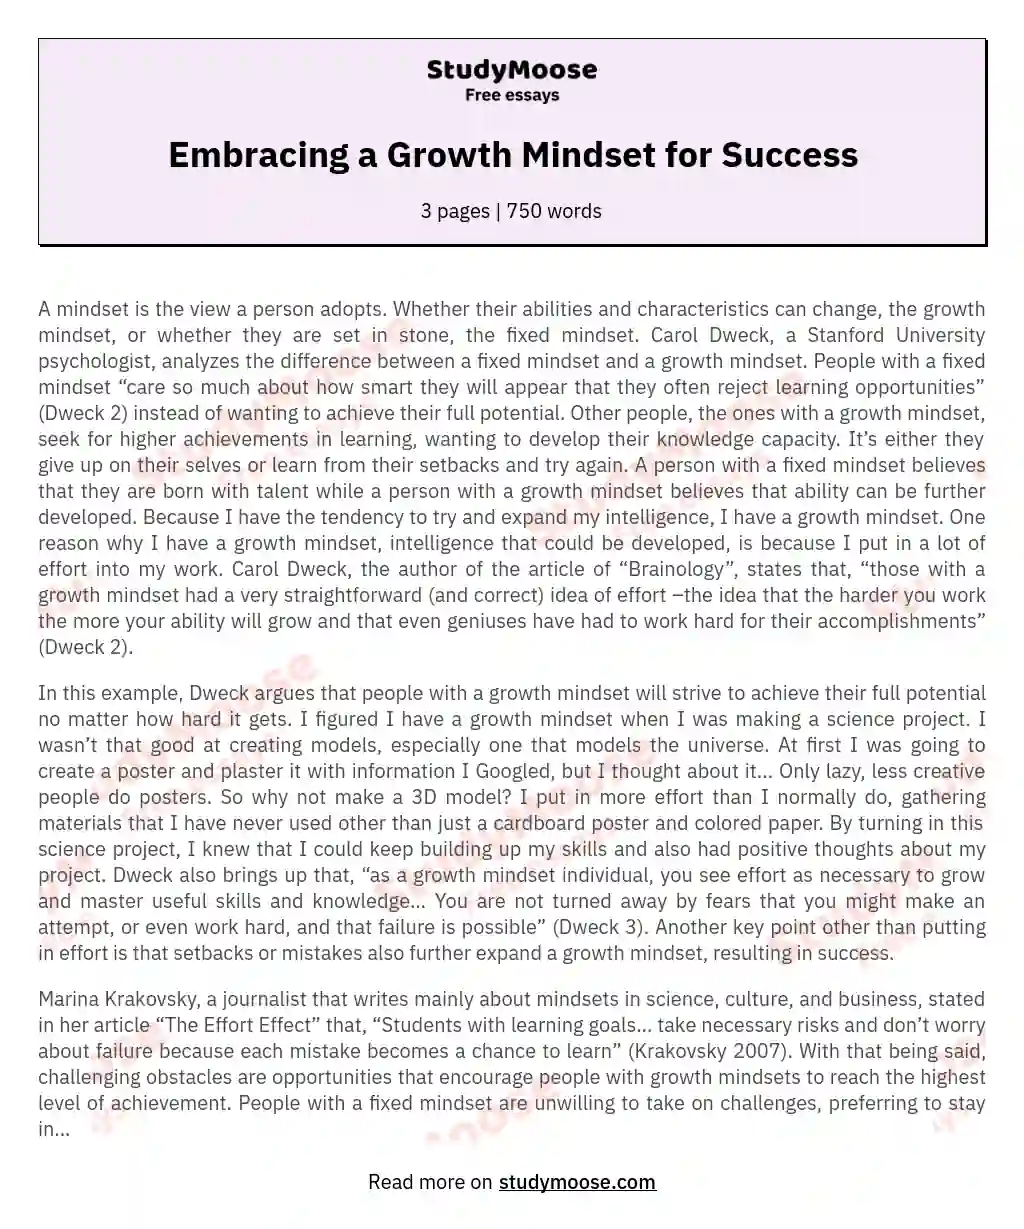 Embracing a Growth Mindset for Success essay